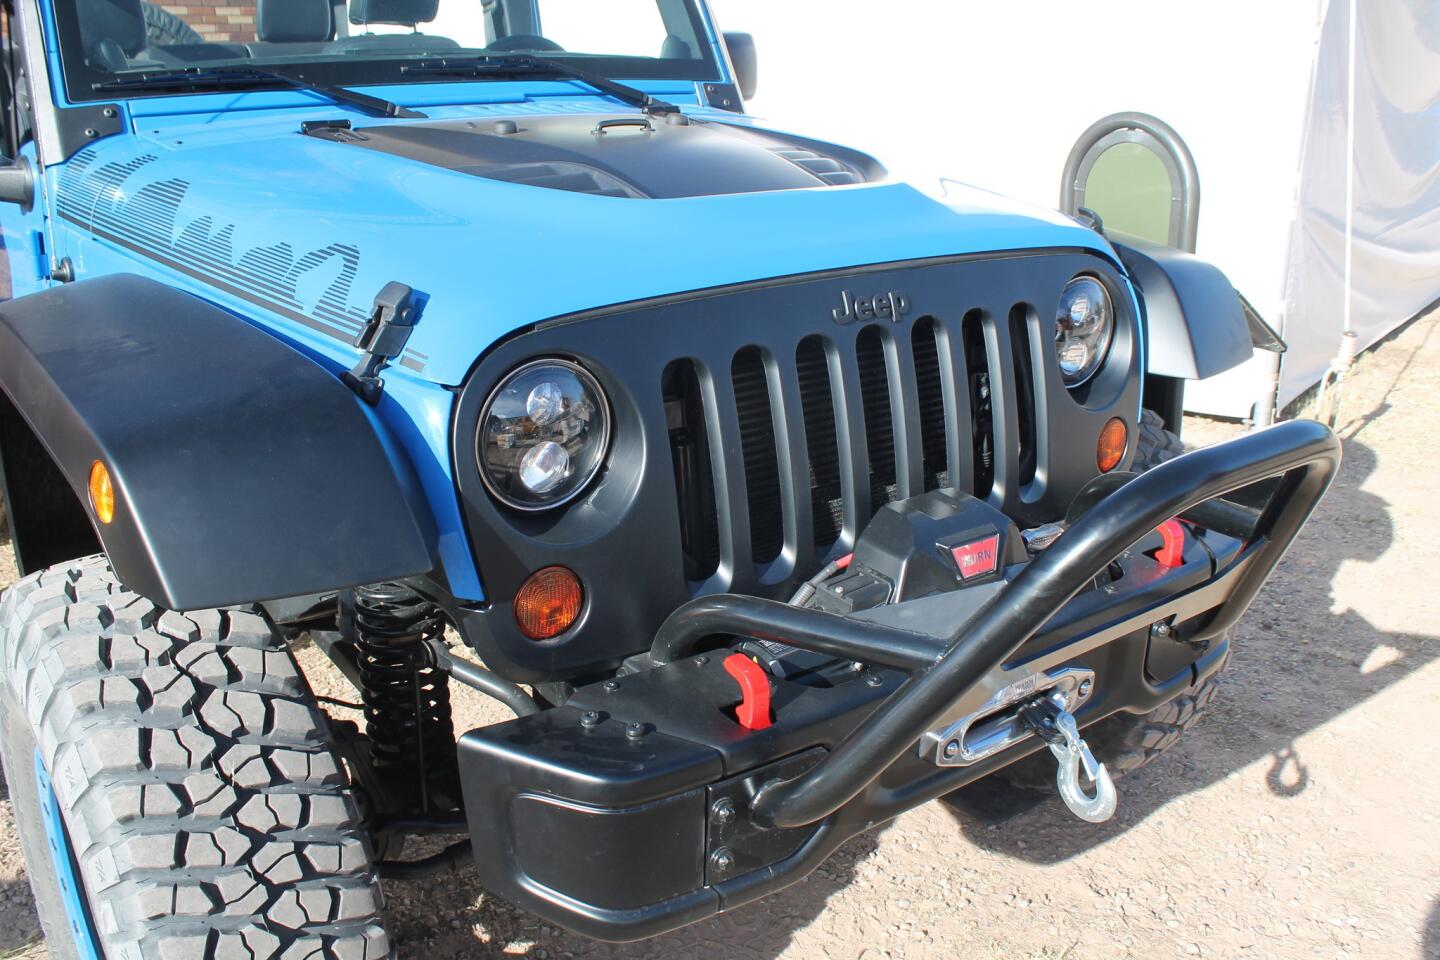 The most aggressive of the prototypes that Jeep brought to the Safari, the Wrangler Max features over $20,000 worth of upgrades to the suspension, axles, body and wheels.